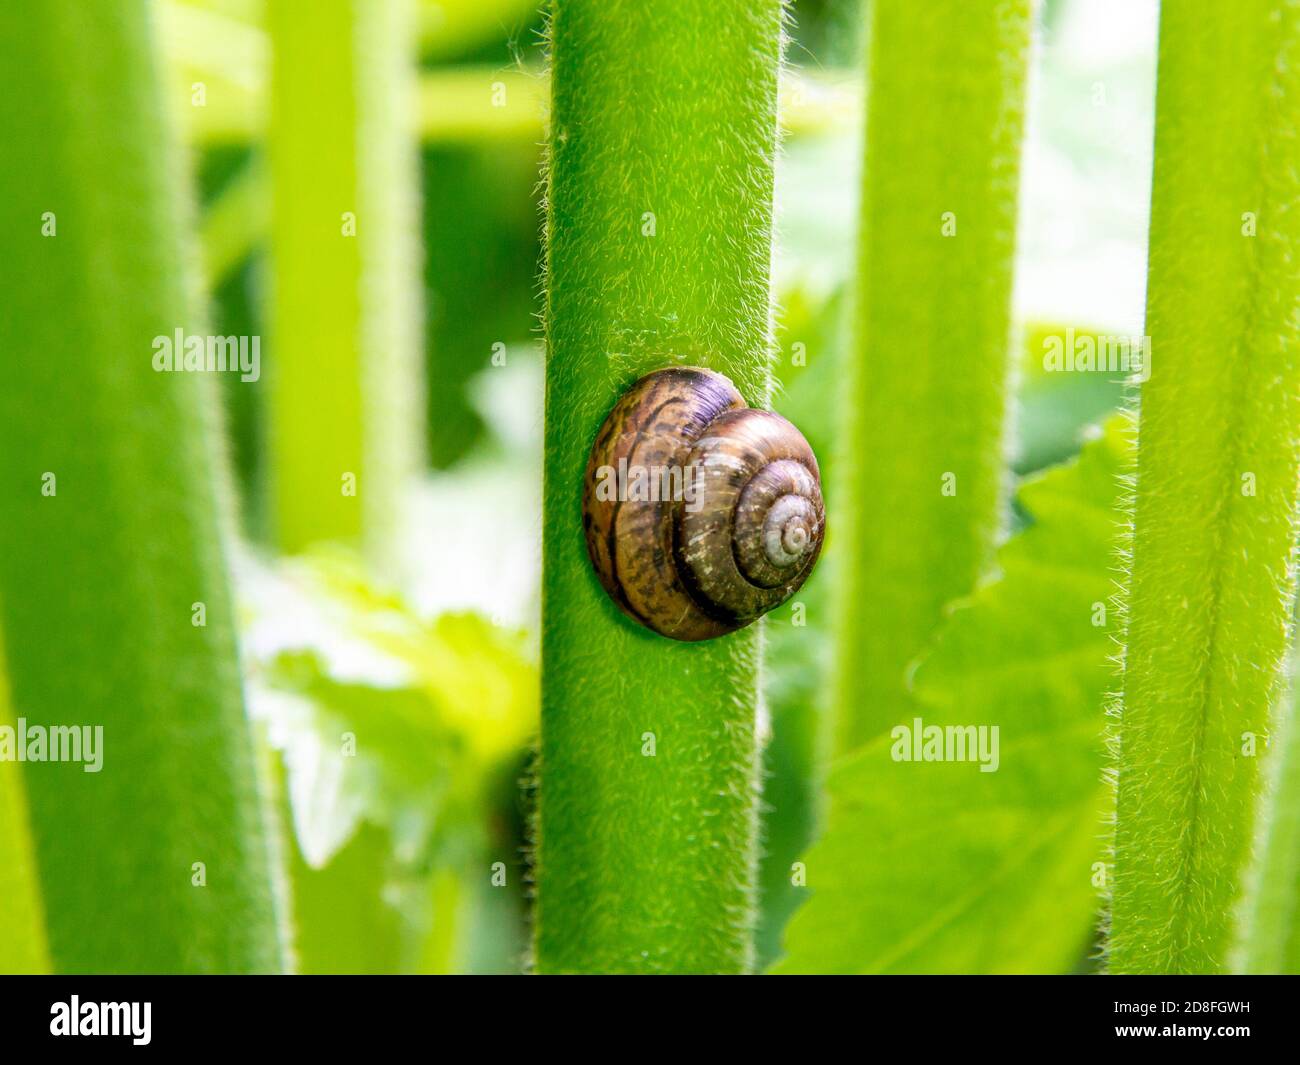 Forest snail in a striped shell in natural habitat on a plant stem, close-up and selective focus Stock Photo